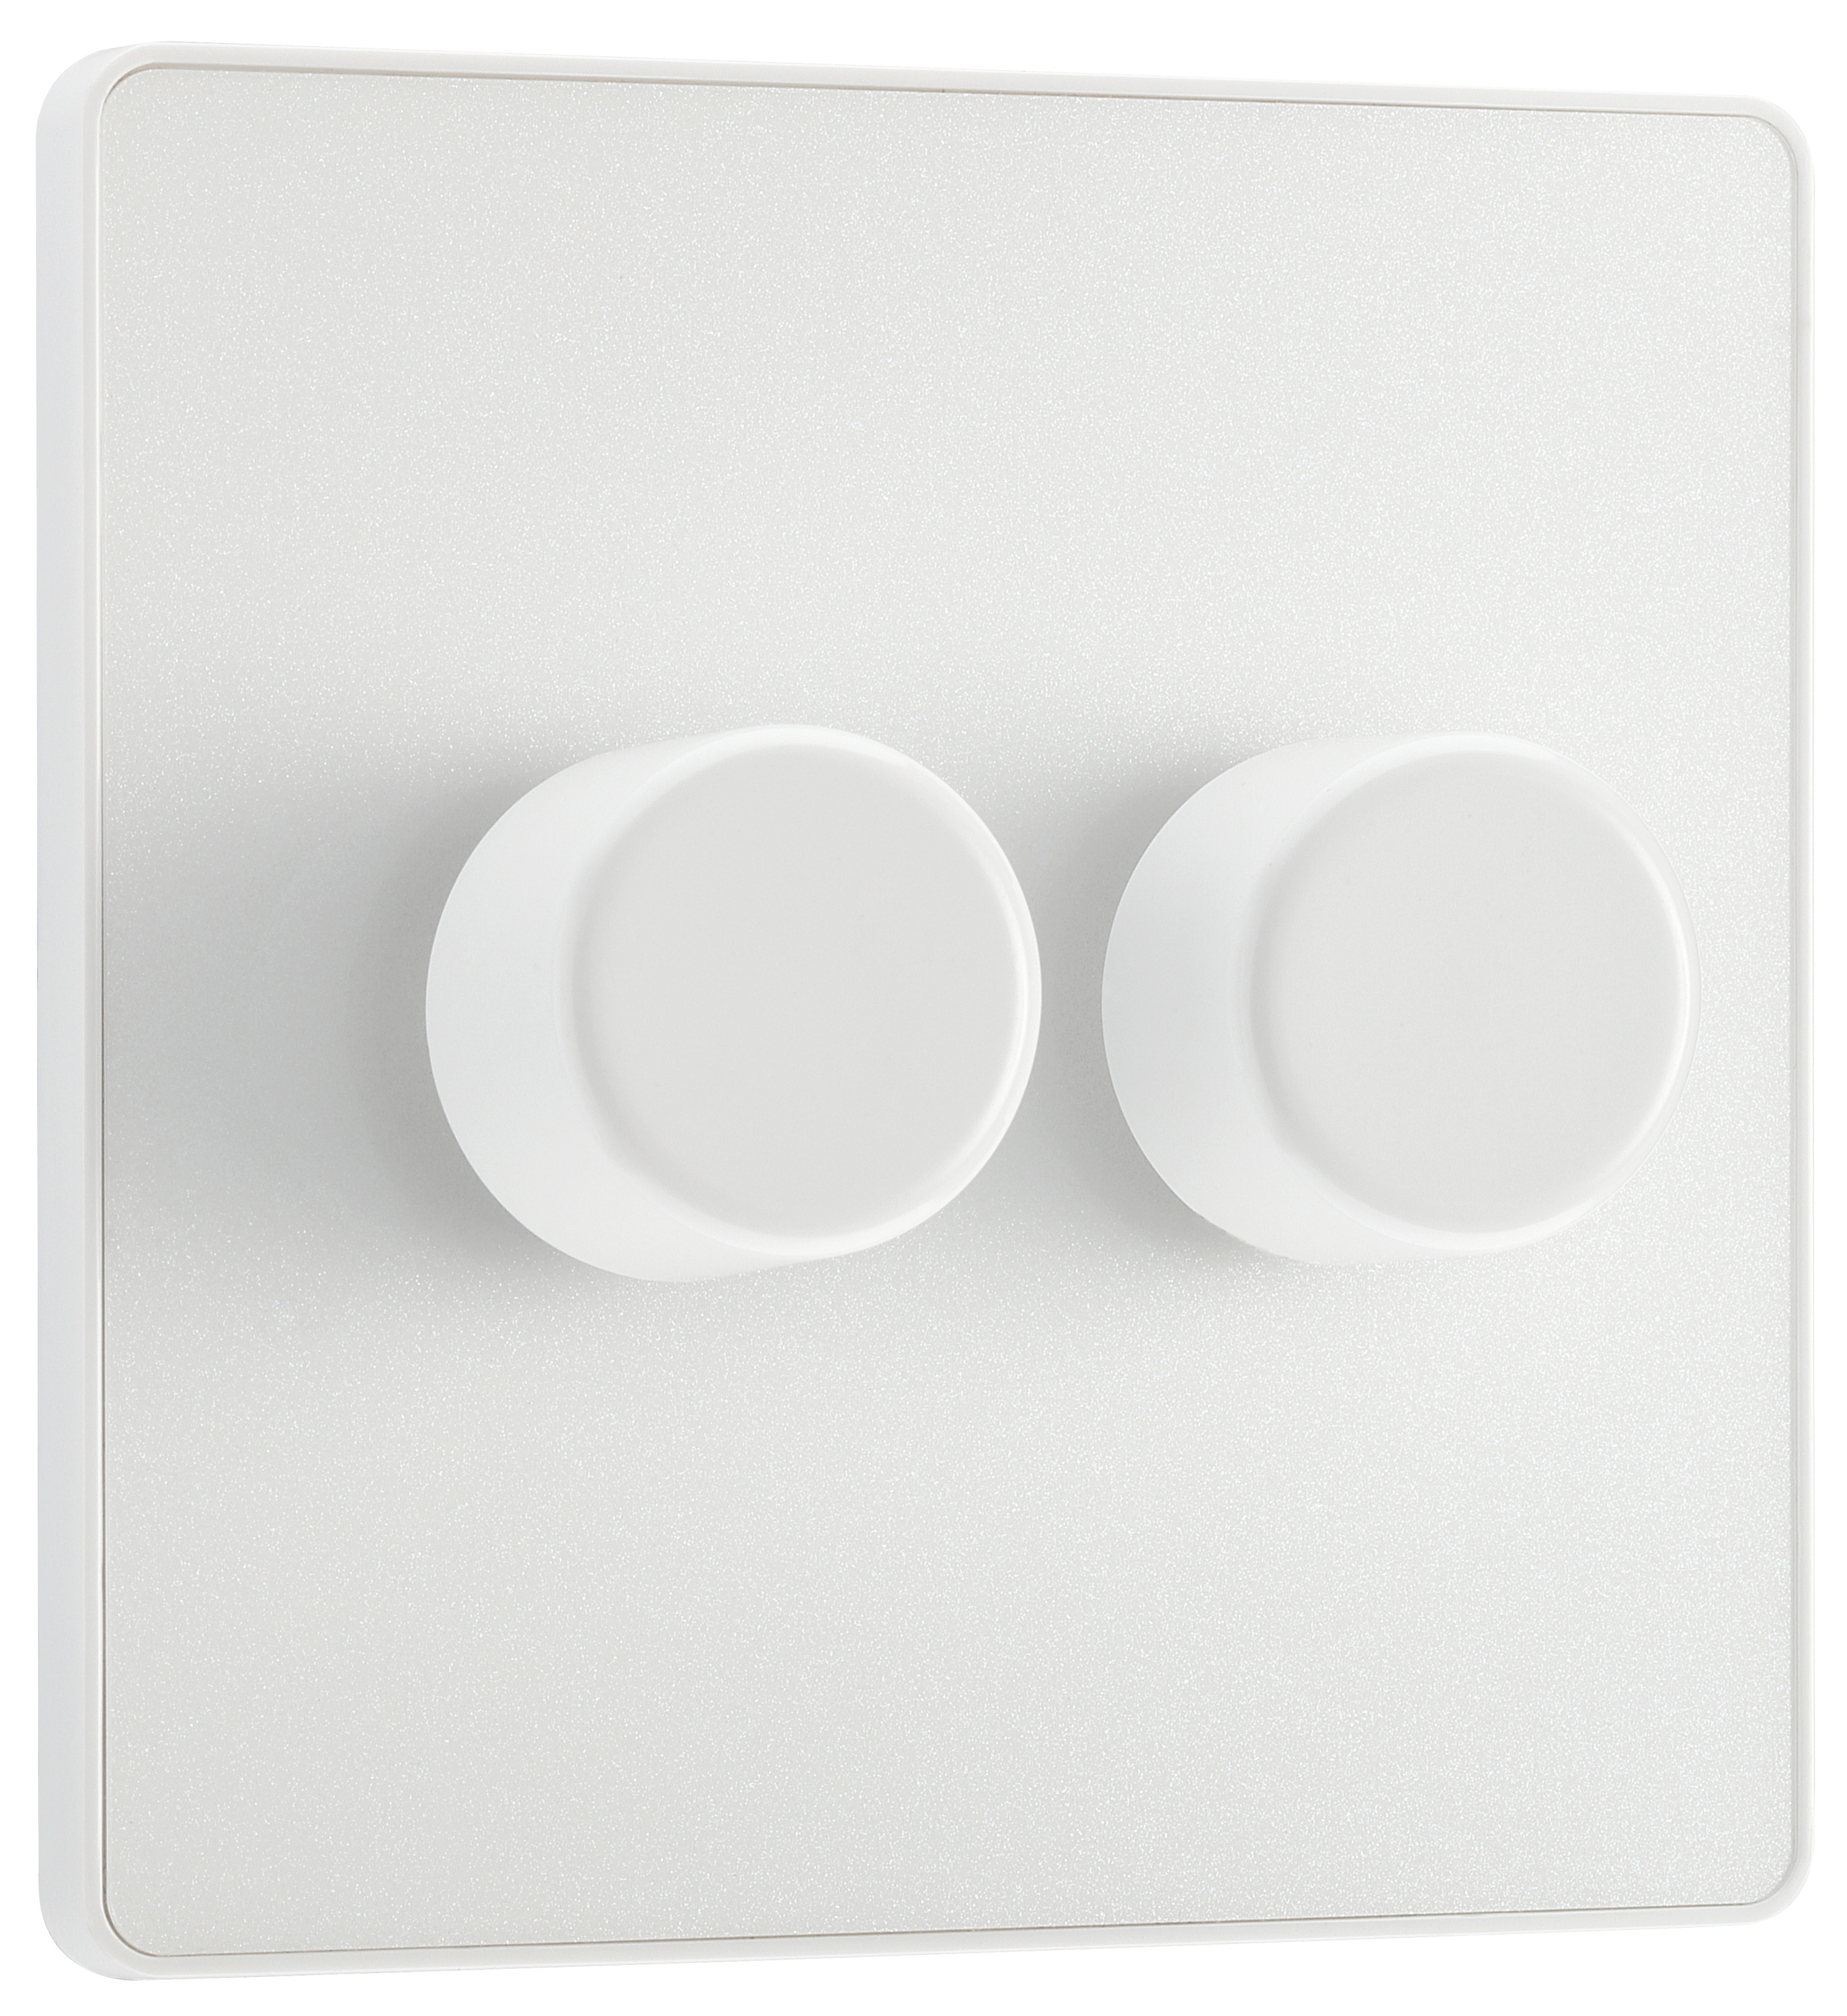 Image of BG Evolve Pearlescent White 2 Way Trailing Edge Led Push On / Off Led Double Dimmer Switch - 200W